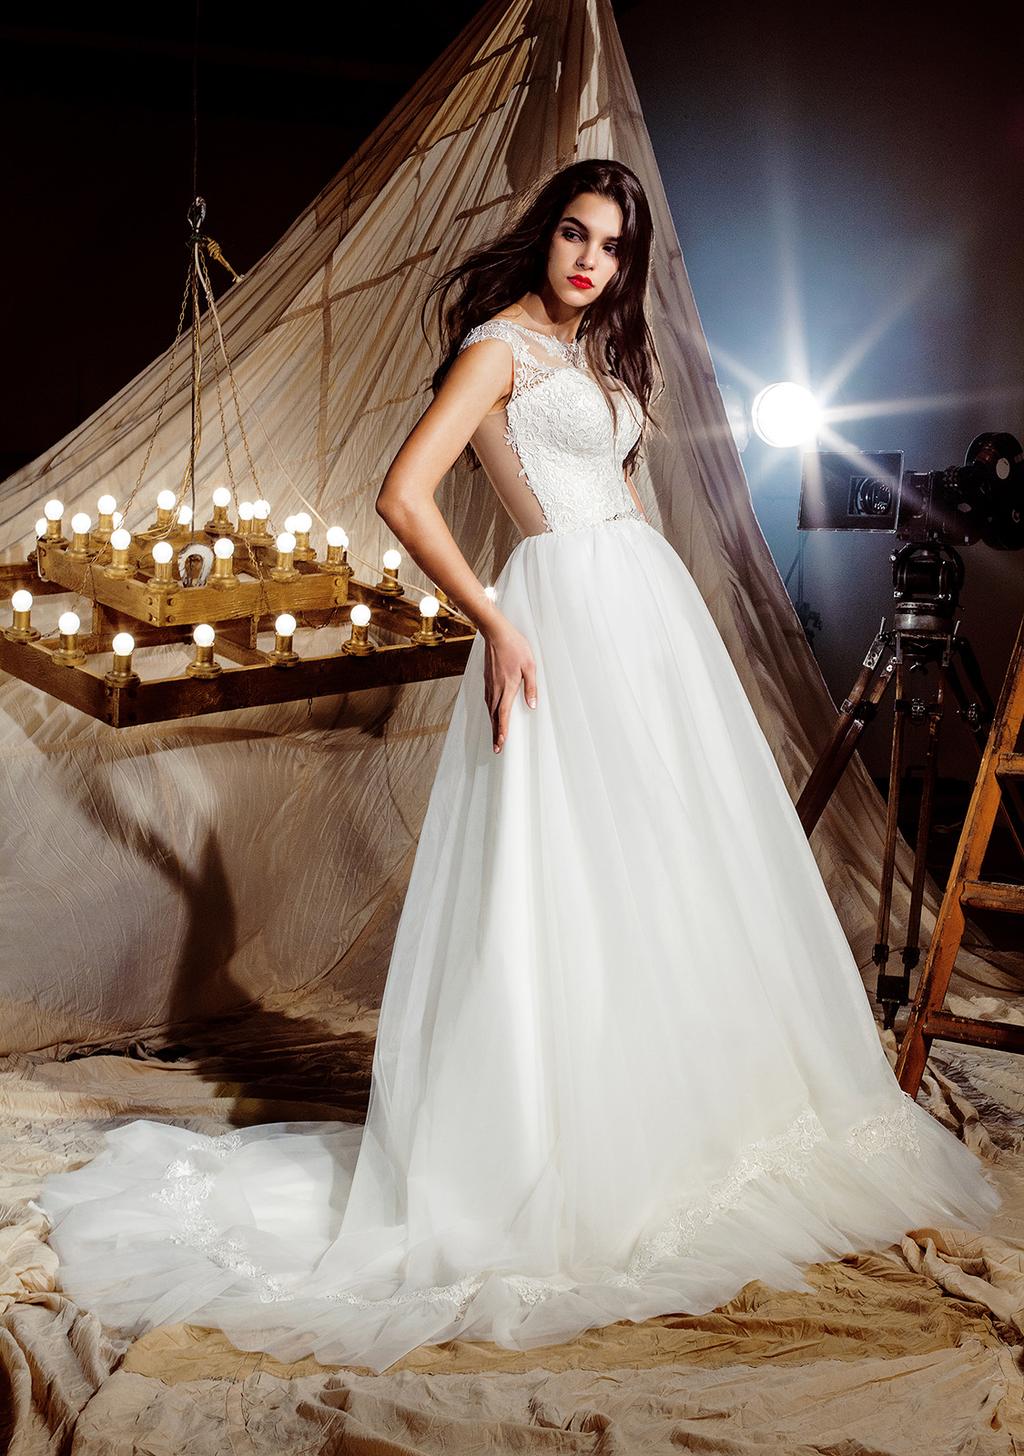 Tina Wholesale price: $315 Exquisite wedding dress with fluffy skirts. Light border of lace macrame forms ruffles along the bottom of tulle skirts.